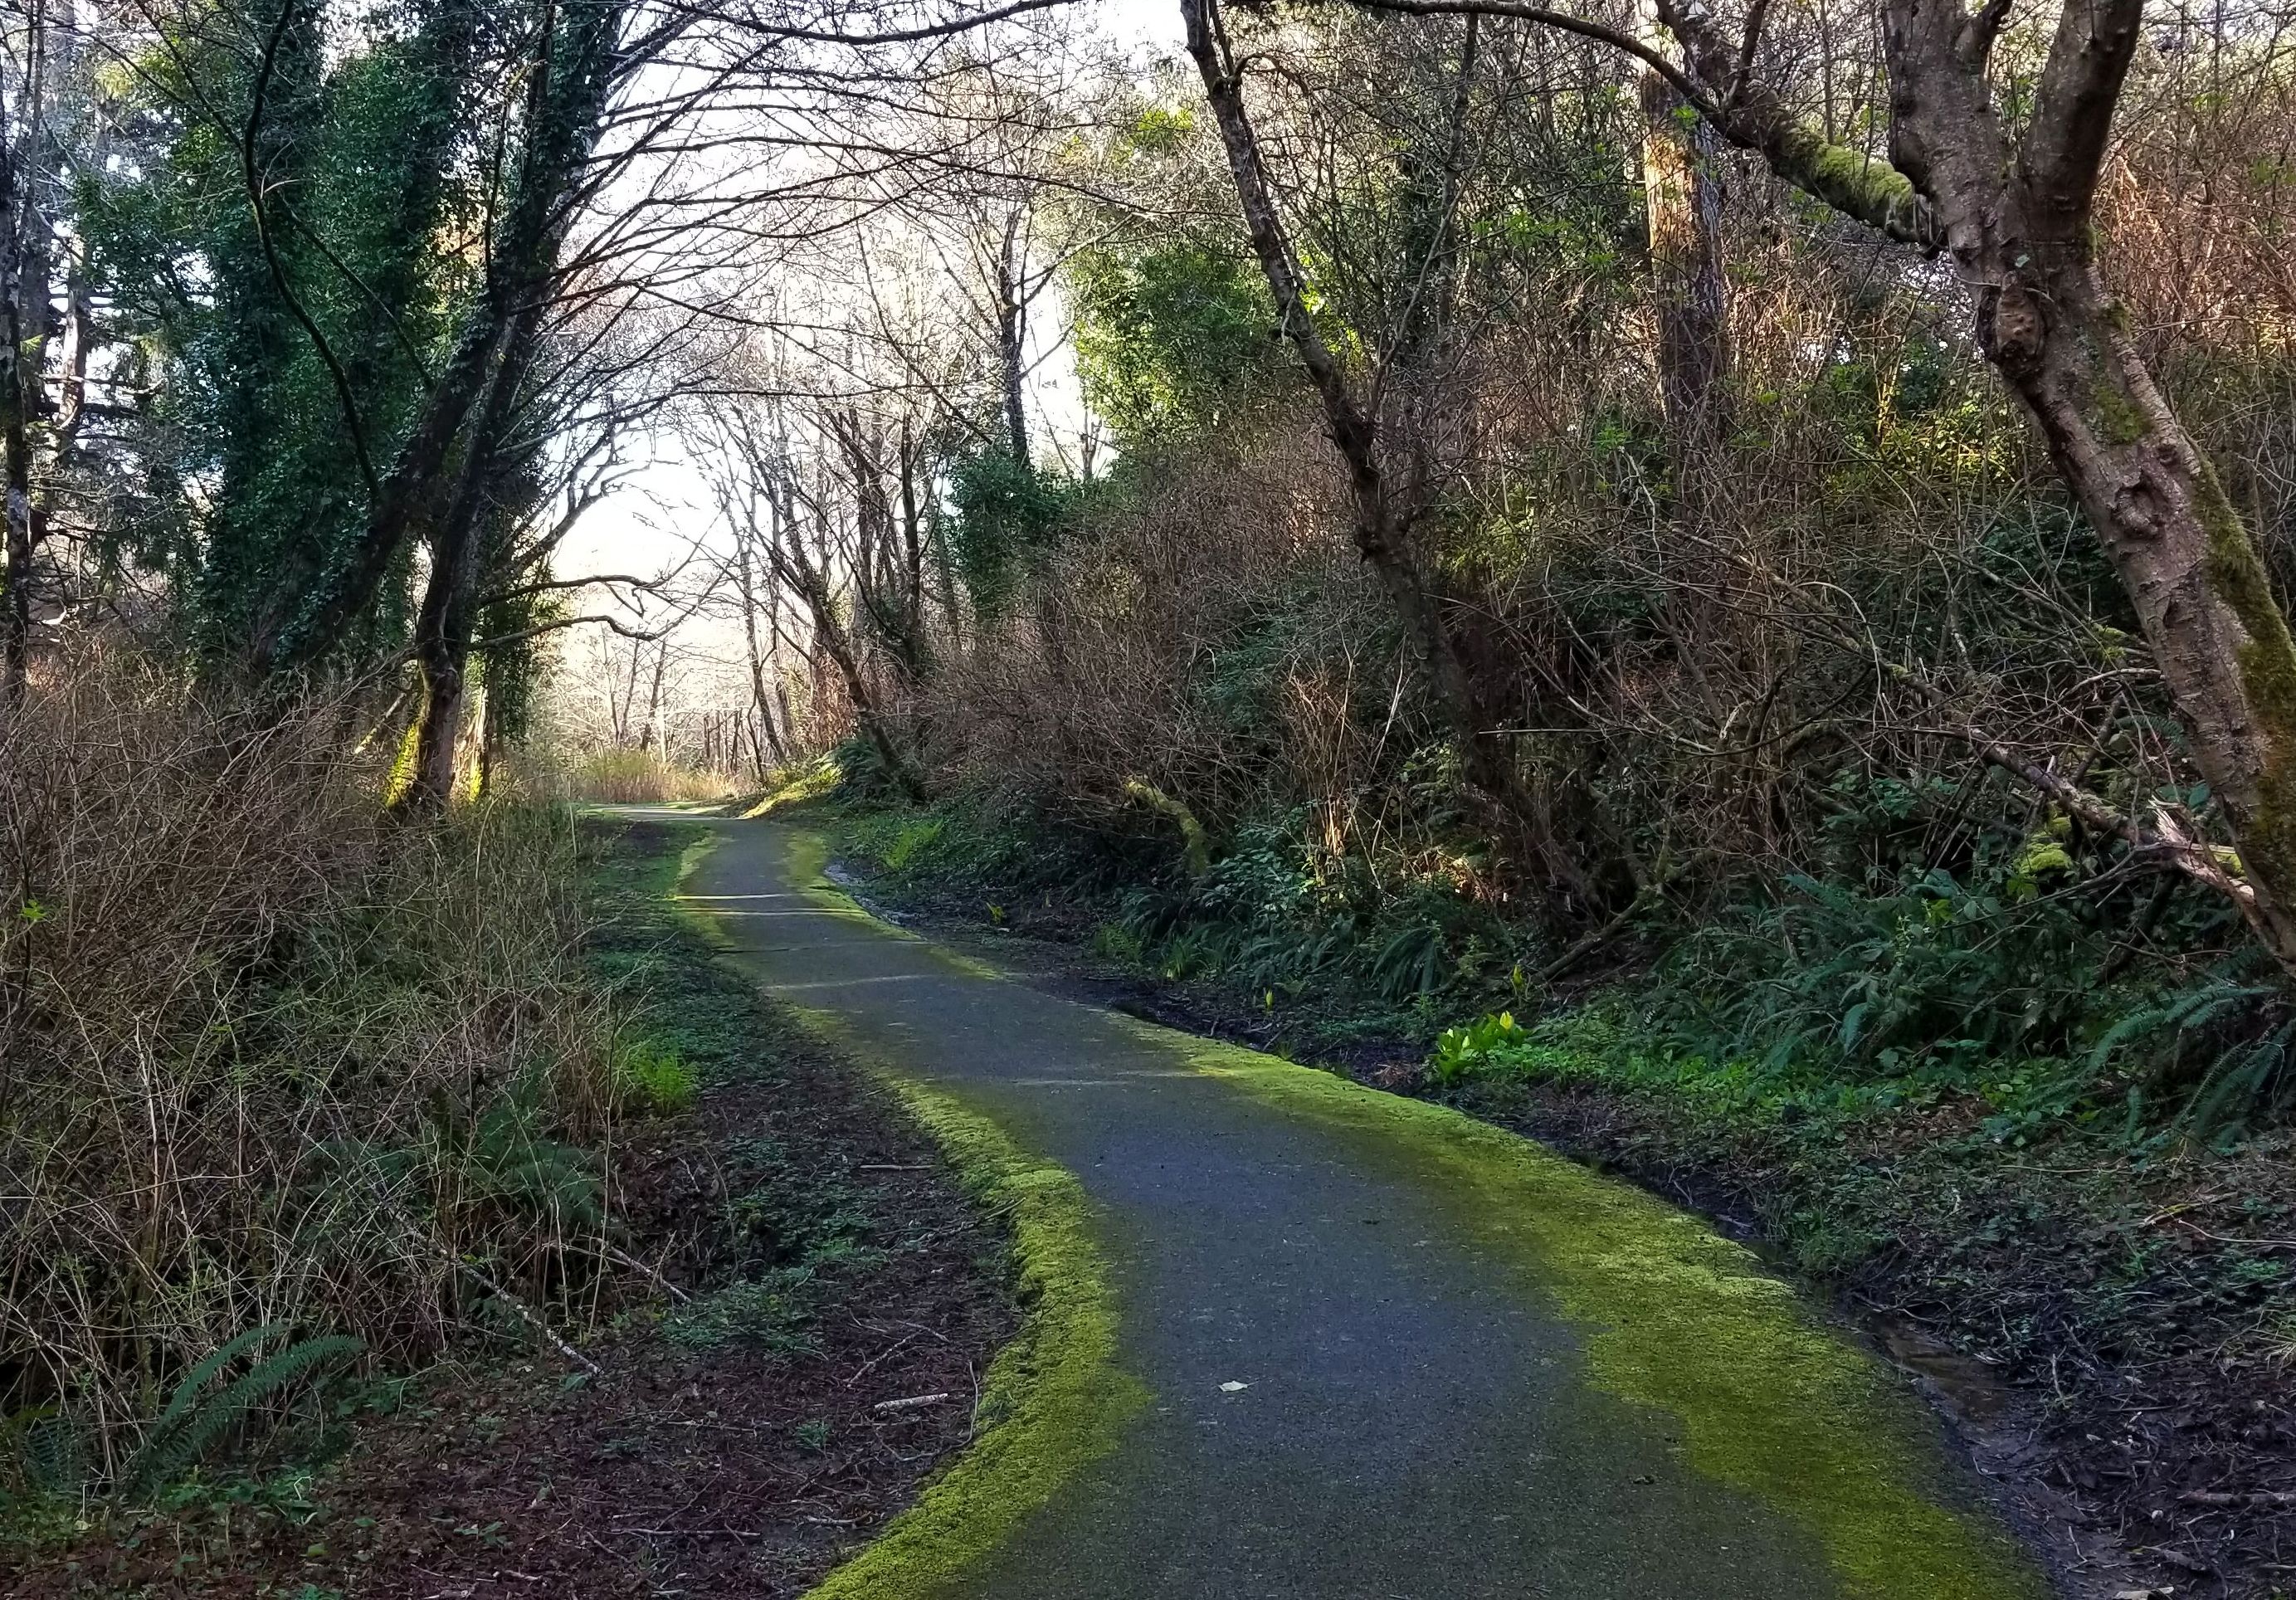 shady mossy paved walkway with overhanging trees